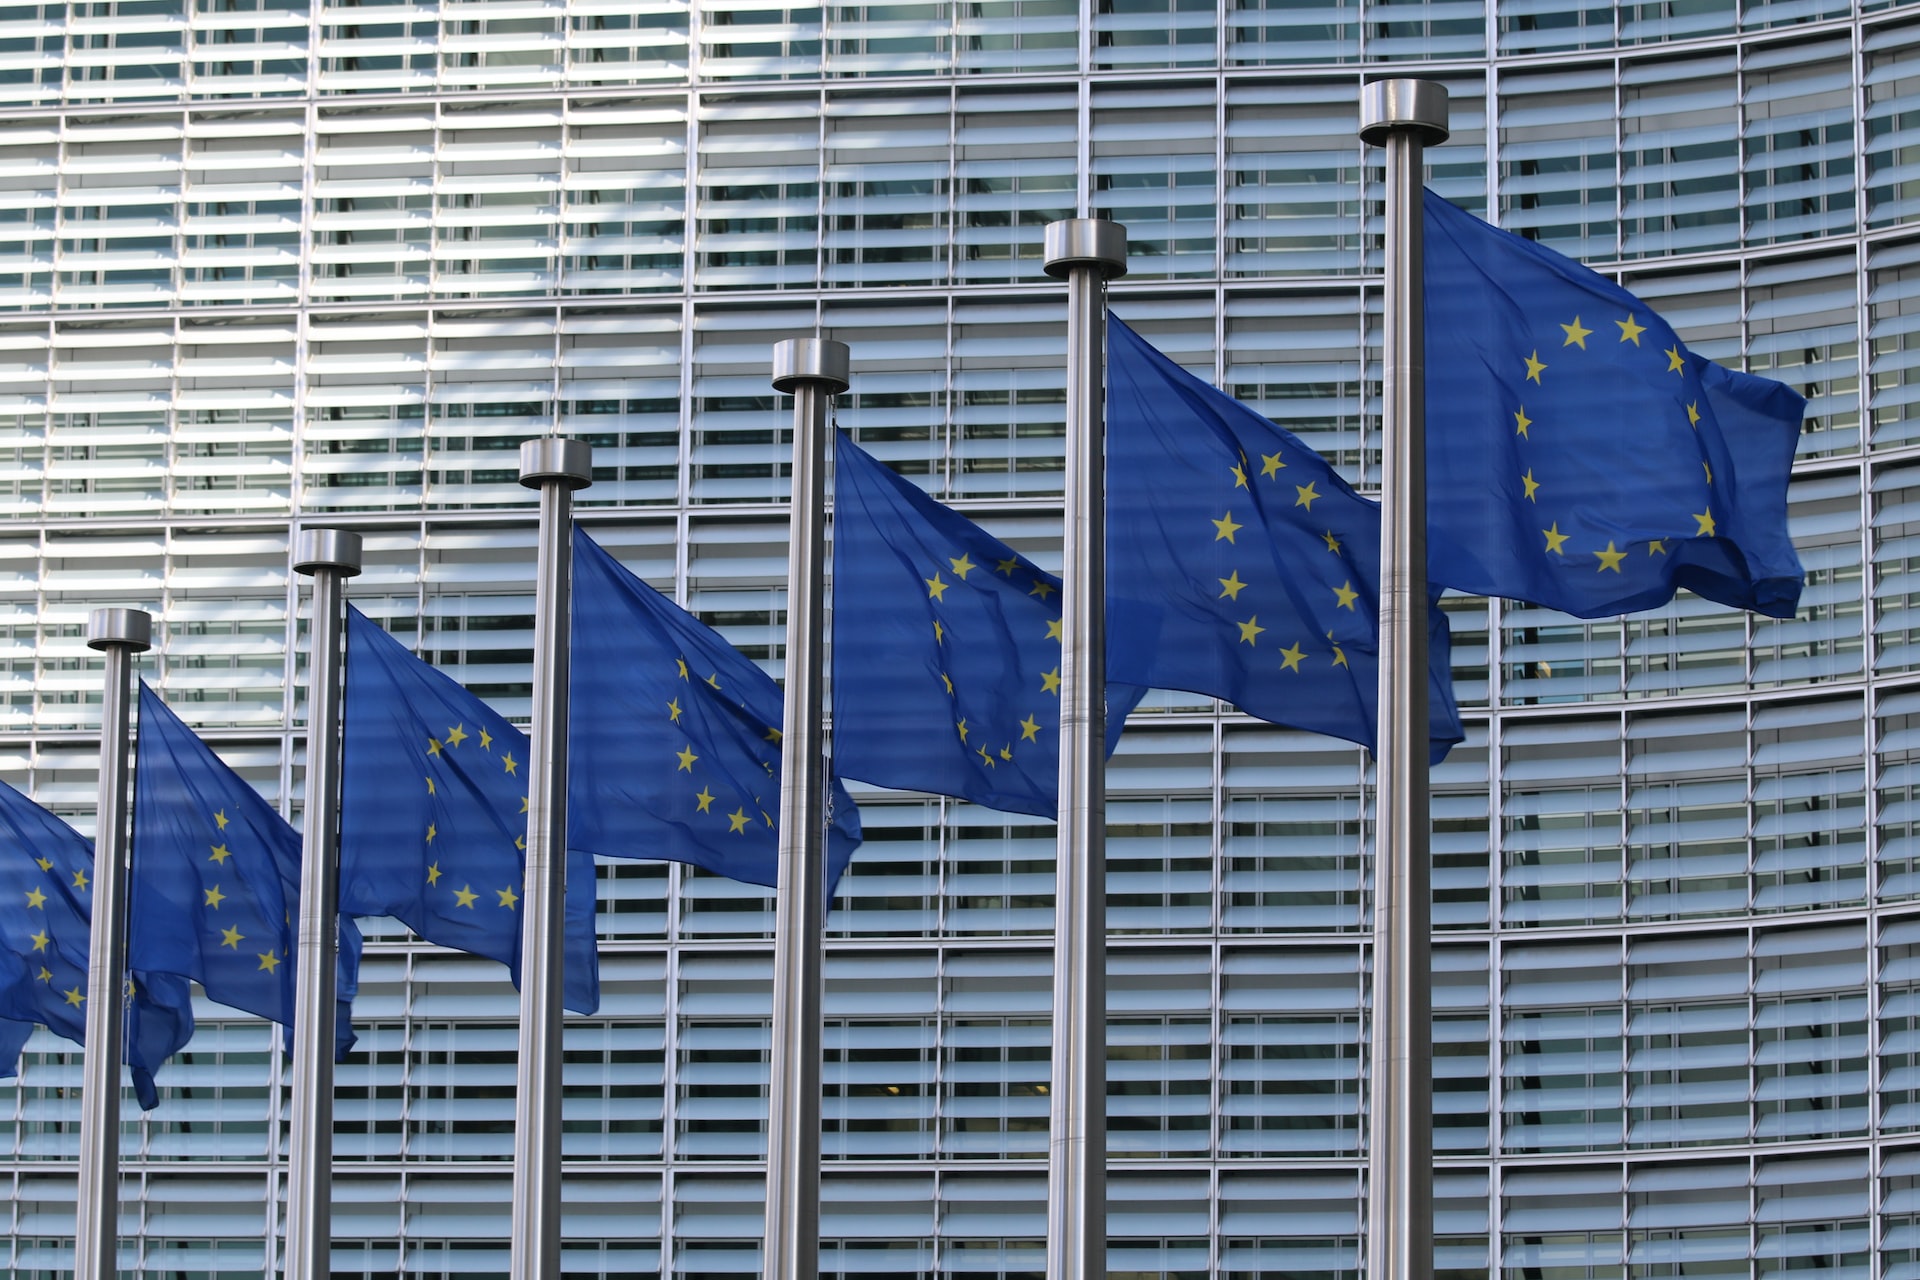 The Future of the European Union and its Potential Impact on Global Politics